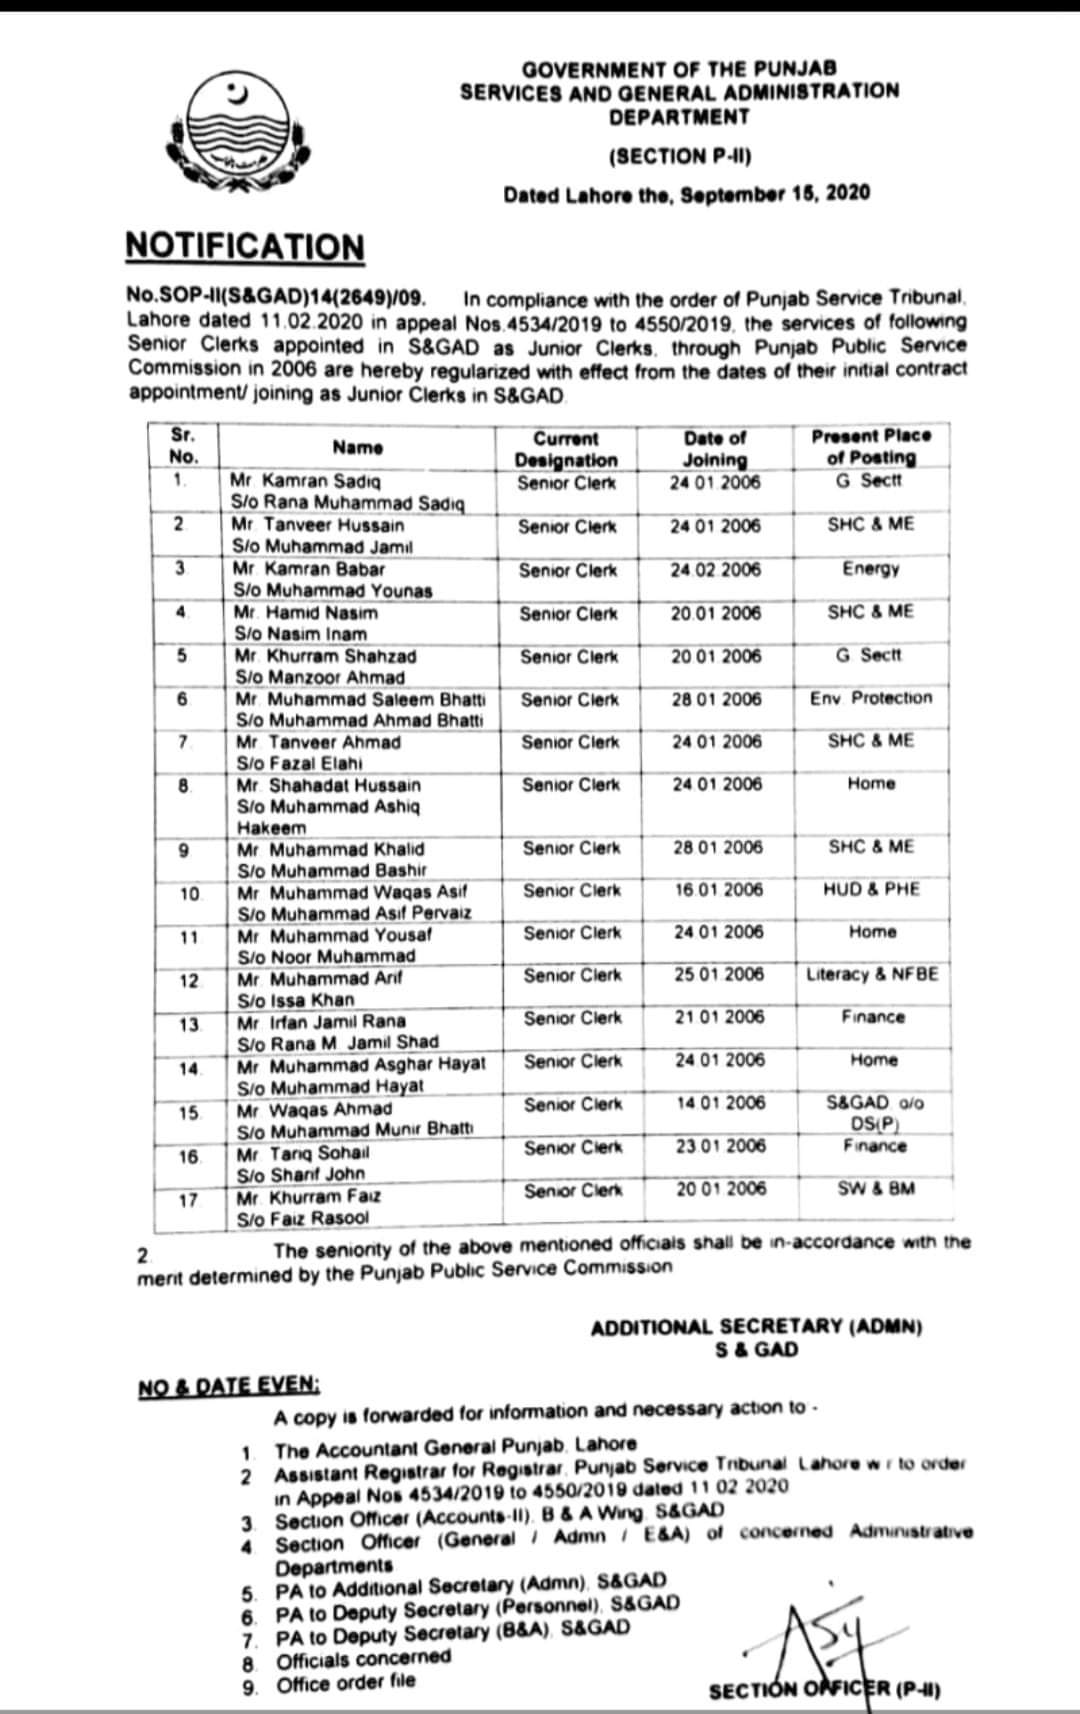 Regularization of Senior Clerks from Date of Appointment